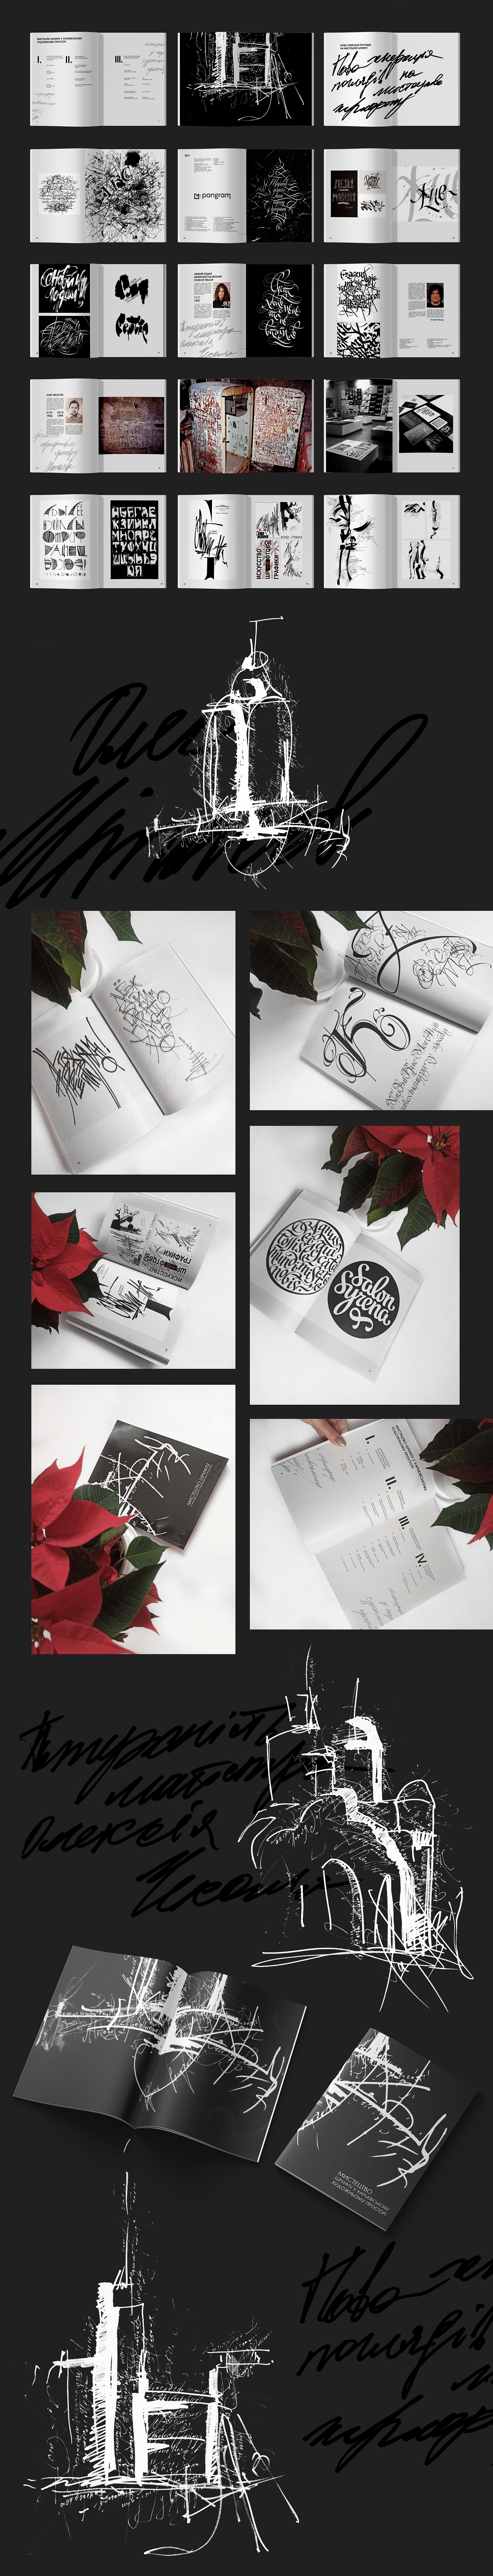 #album #black and white #book #font #graphic #graphicDesign #grasecale #poligraphy